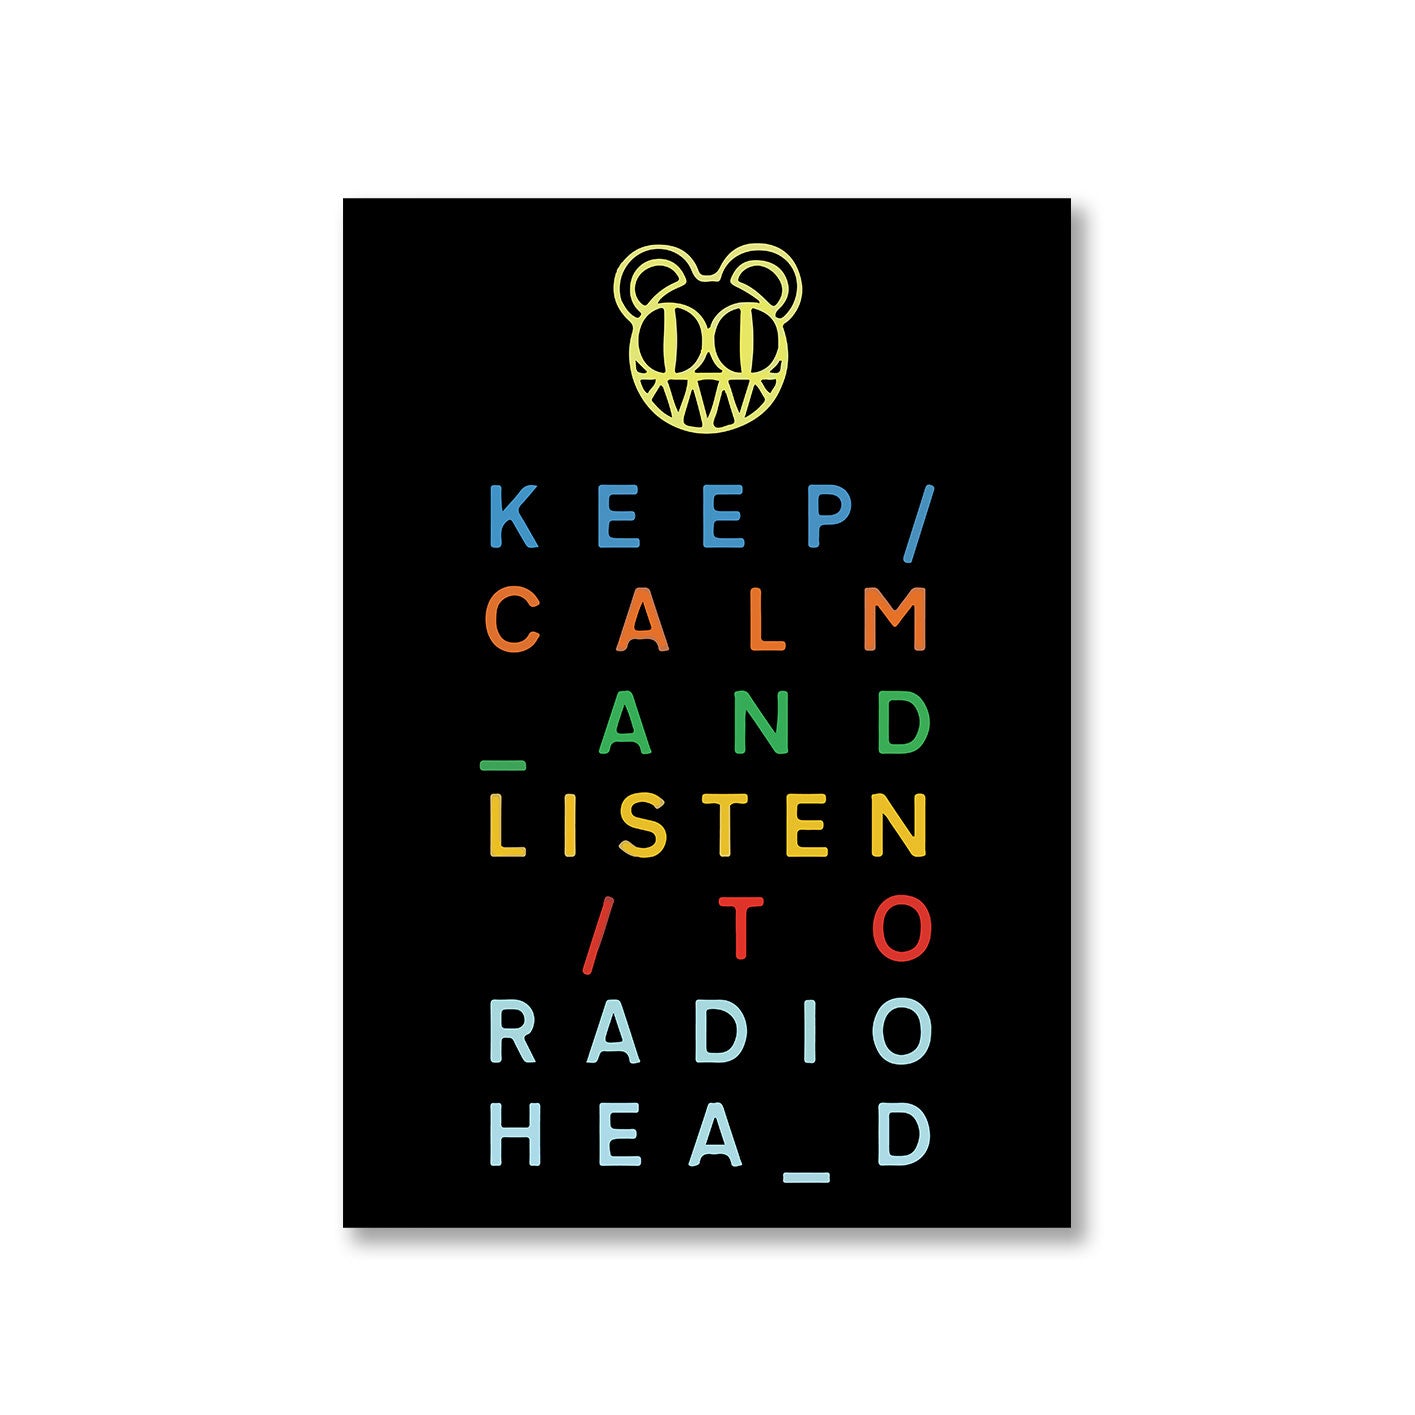 radiohead keep calm poster wall art buy online united states of america usa the banyan tee tbt a4